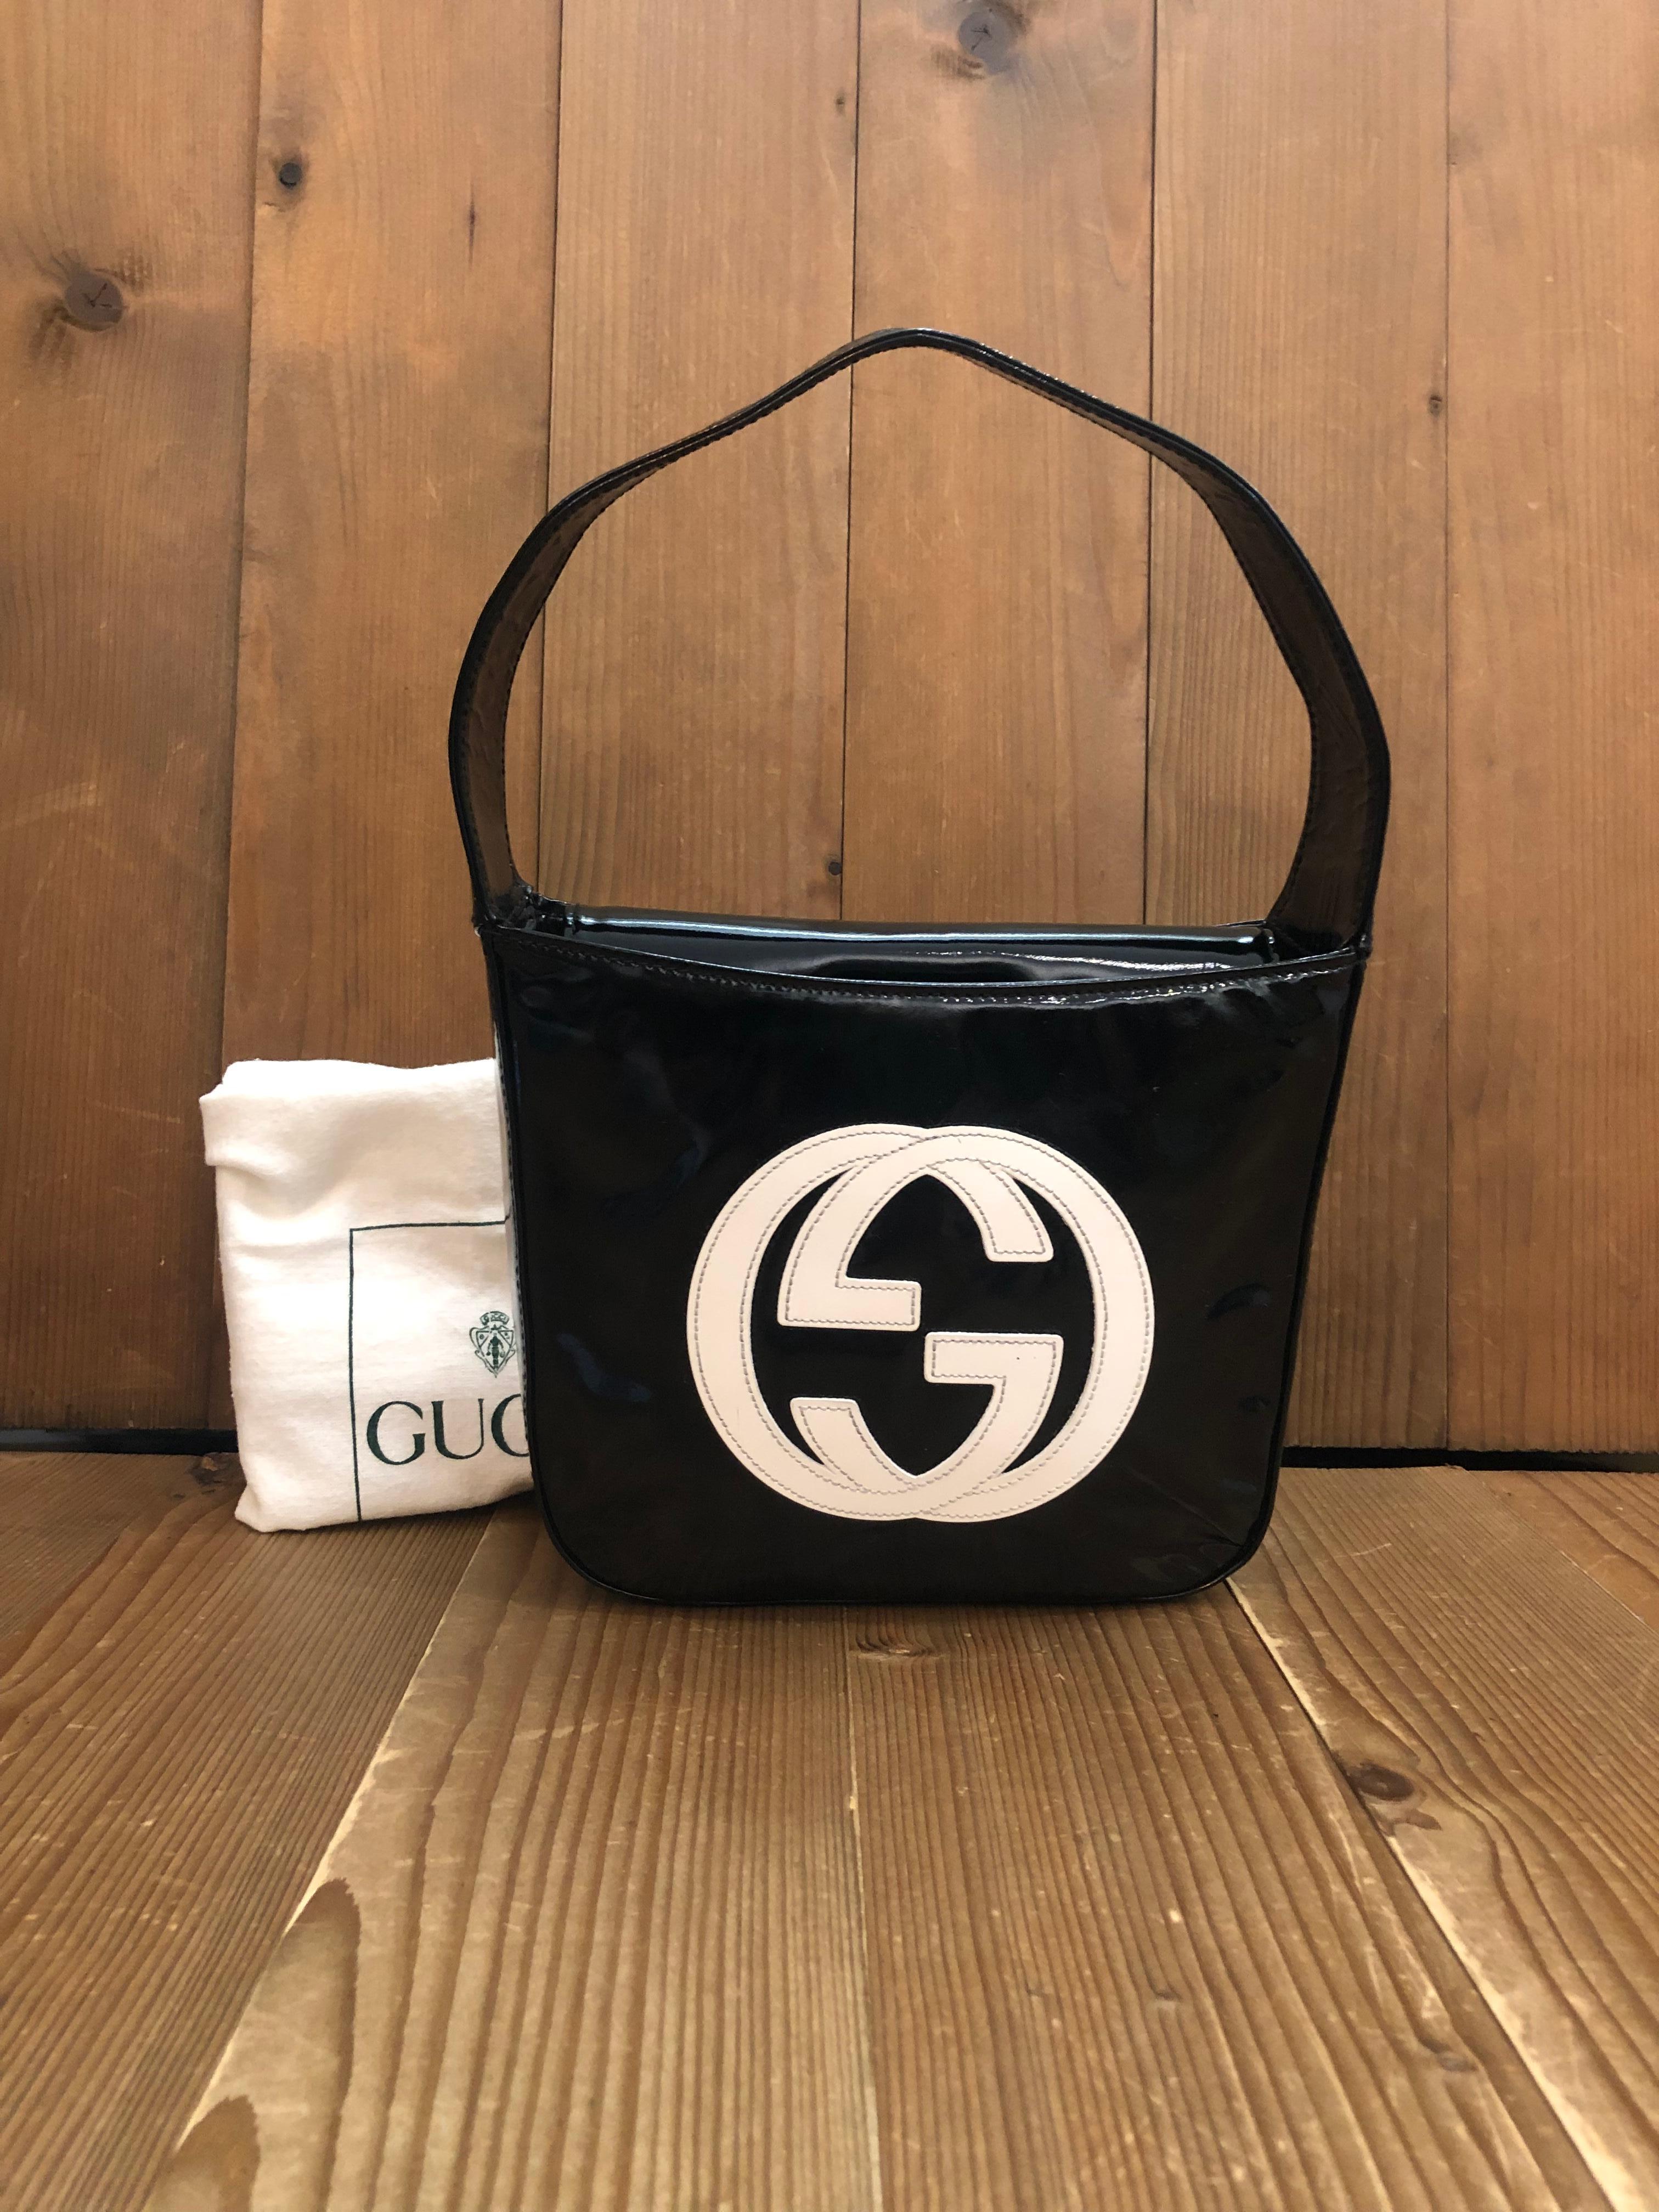 This vintage GUCCI Mini Hobo Handbag is crafted of patent leather in black featuring a massive white GG interlock logo at the front. Top flap magnetic snap closure opens to a coated interior which has been professionally cleaned featuring a patch